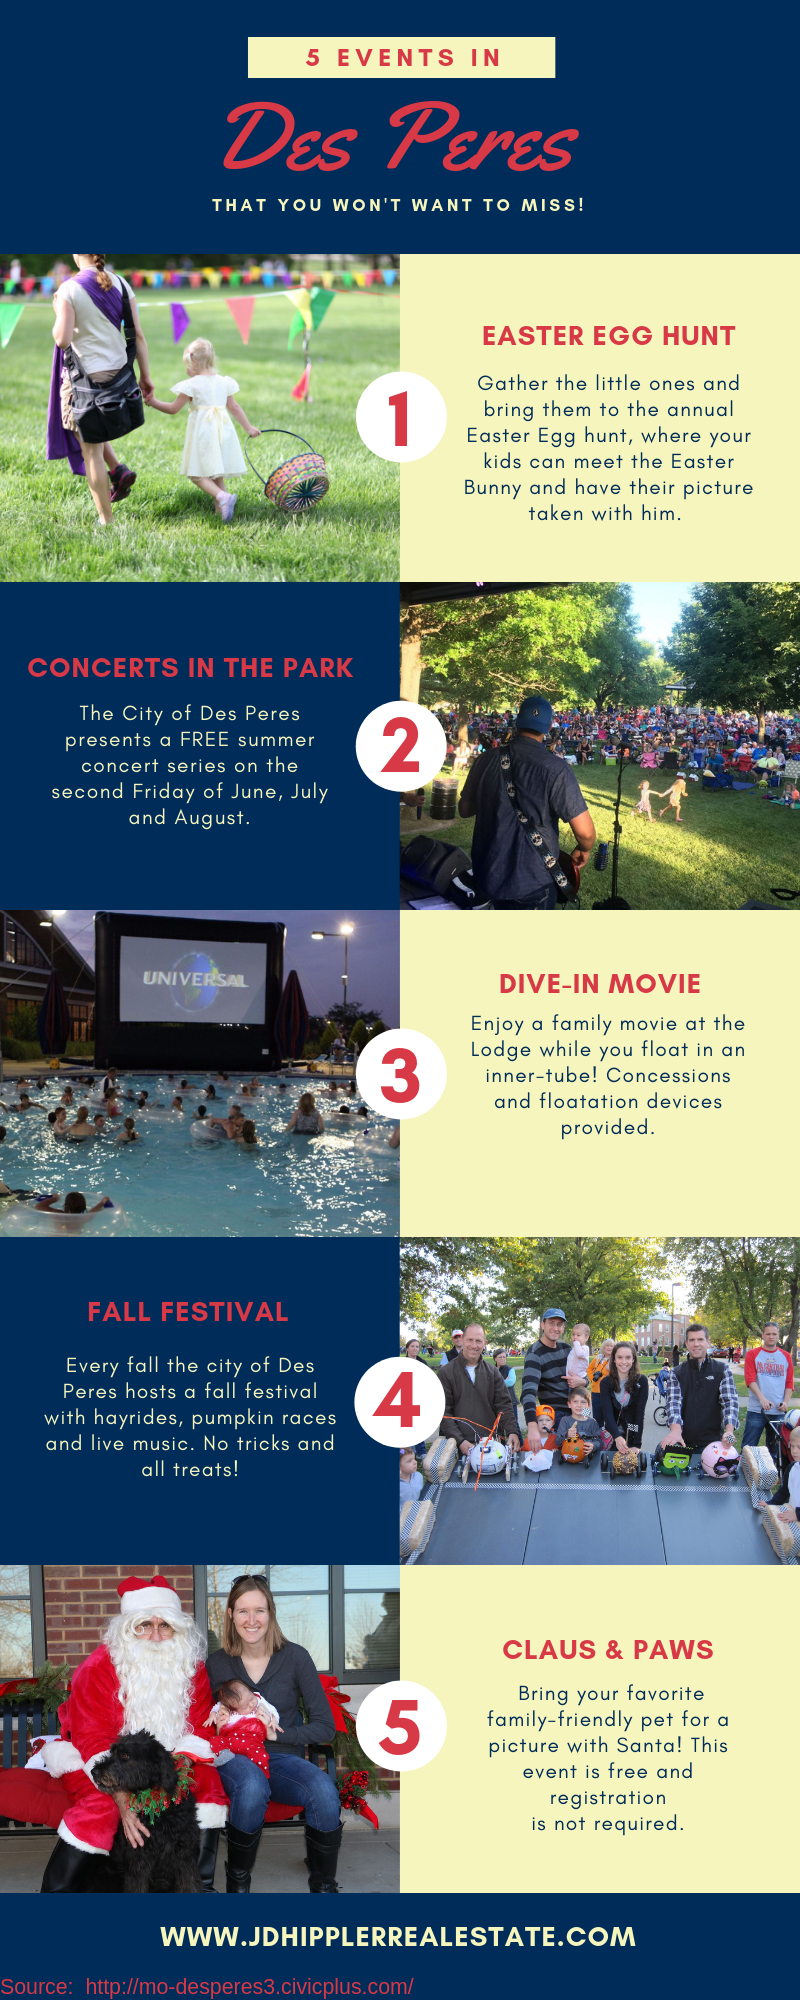 Top 5 Events you won't want to miss in Des Peres Infographic